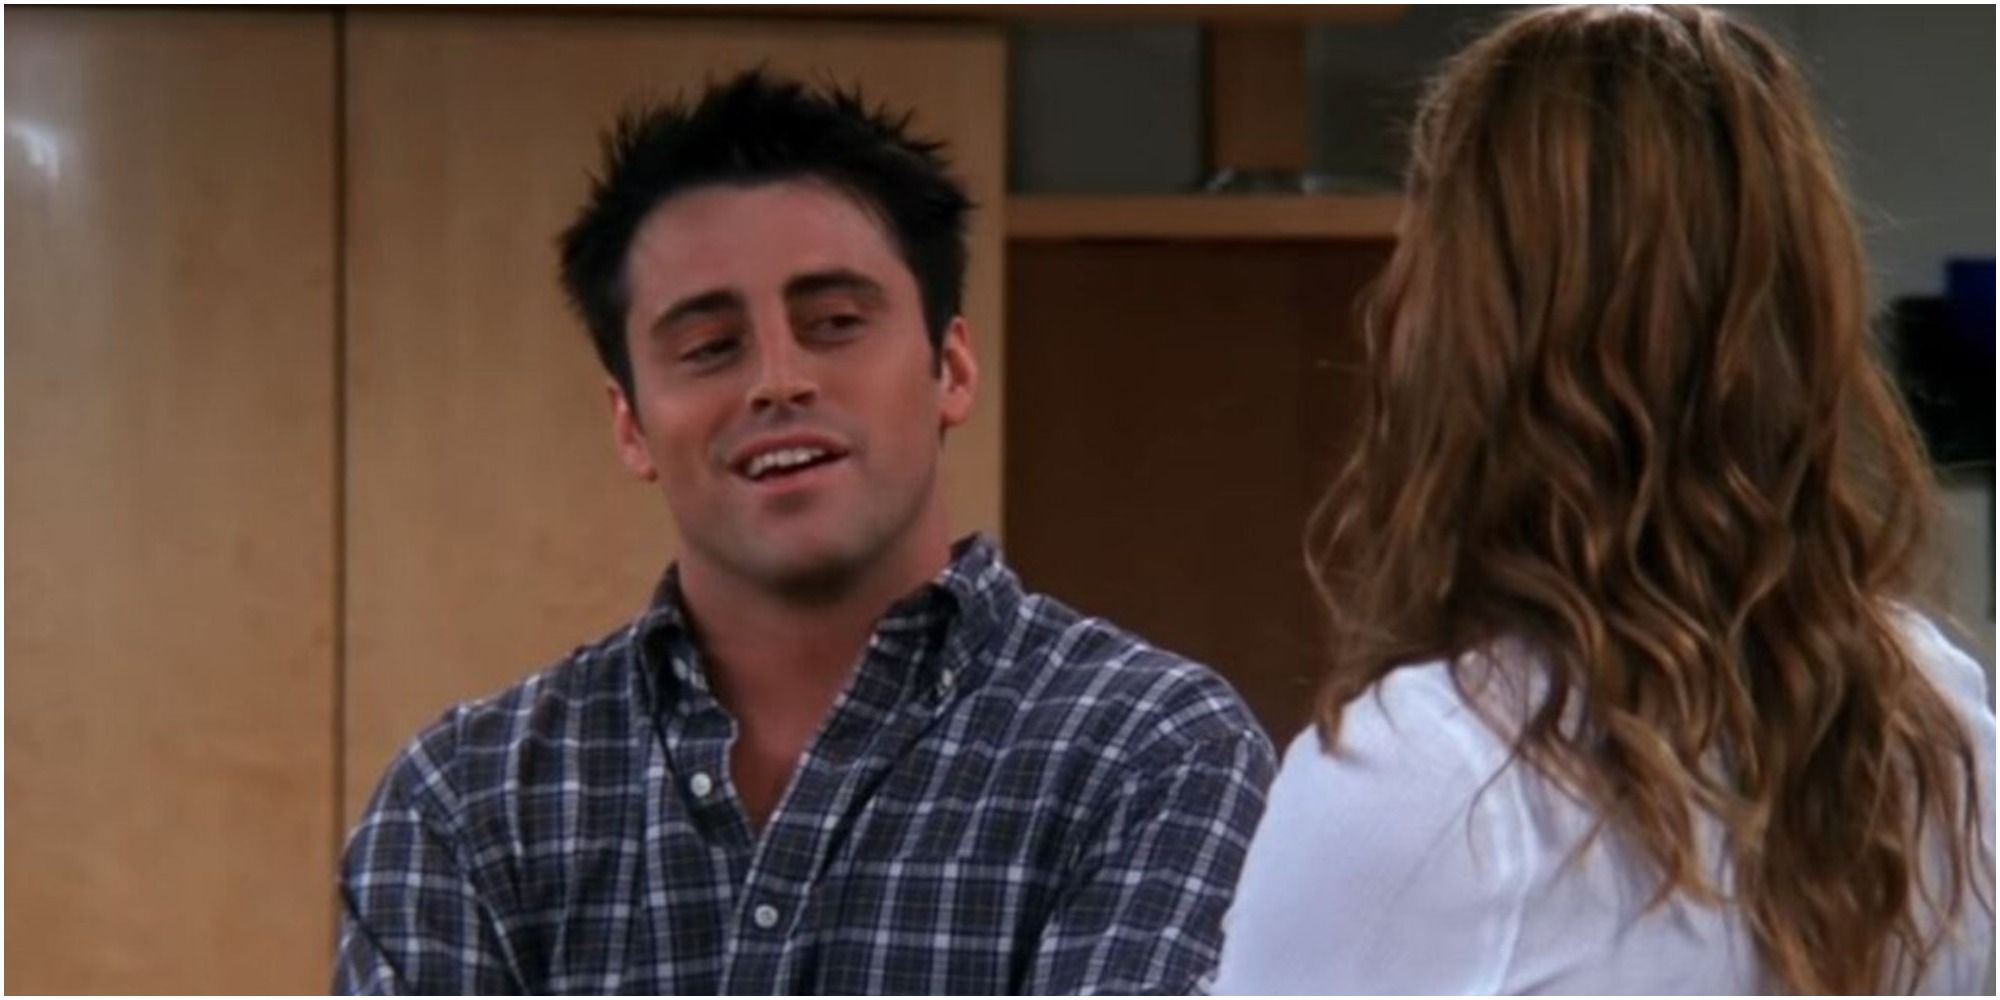 Joey says his pick up line to Janine